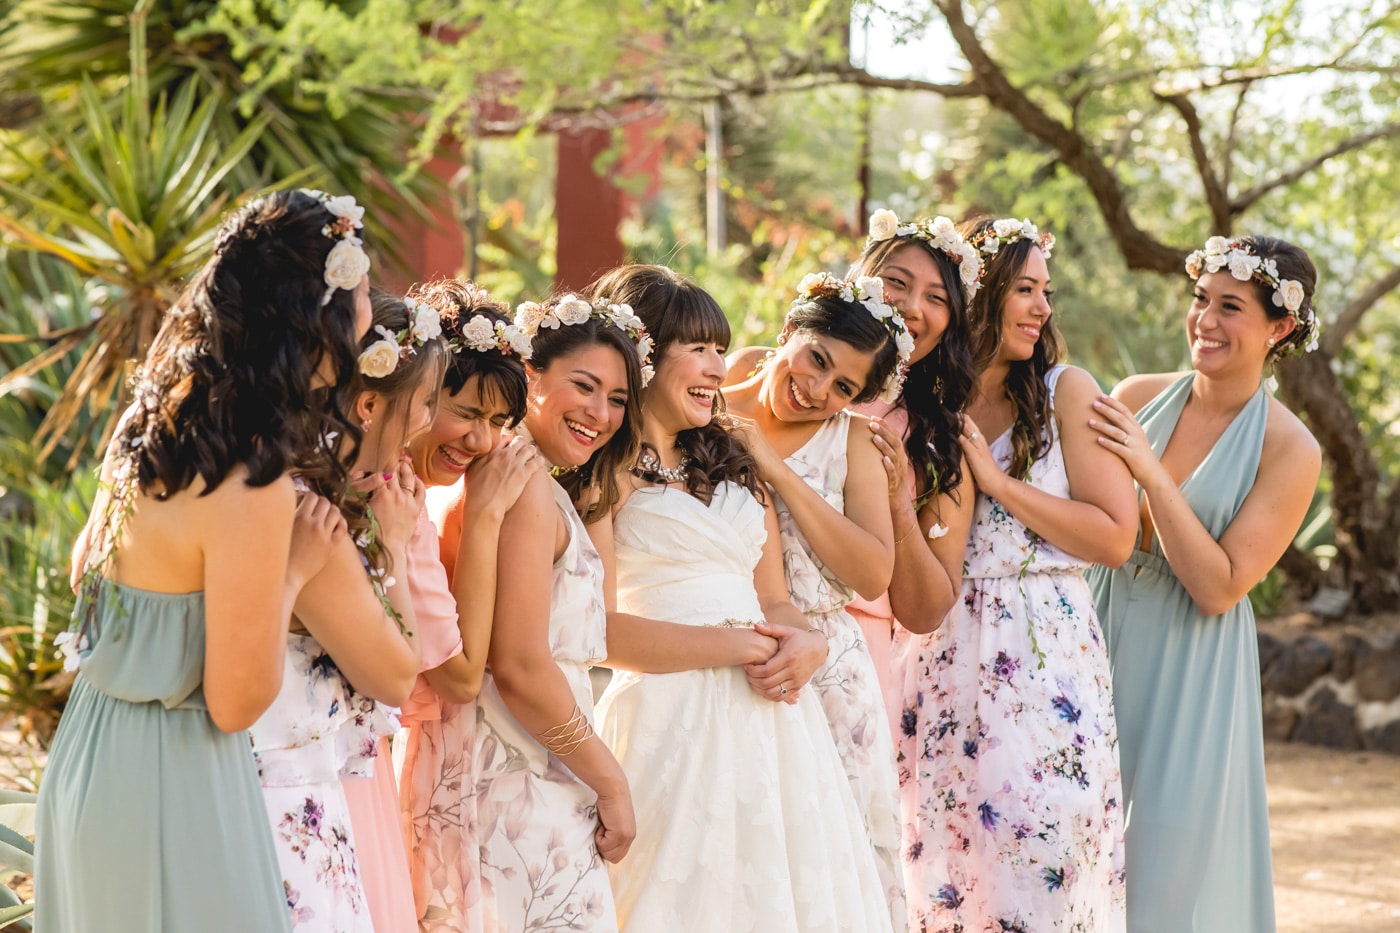 Bride and bridesmaids smiling together